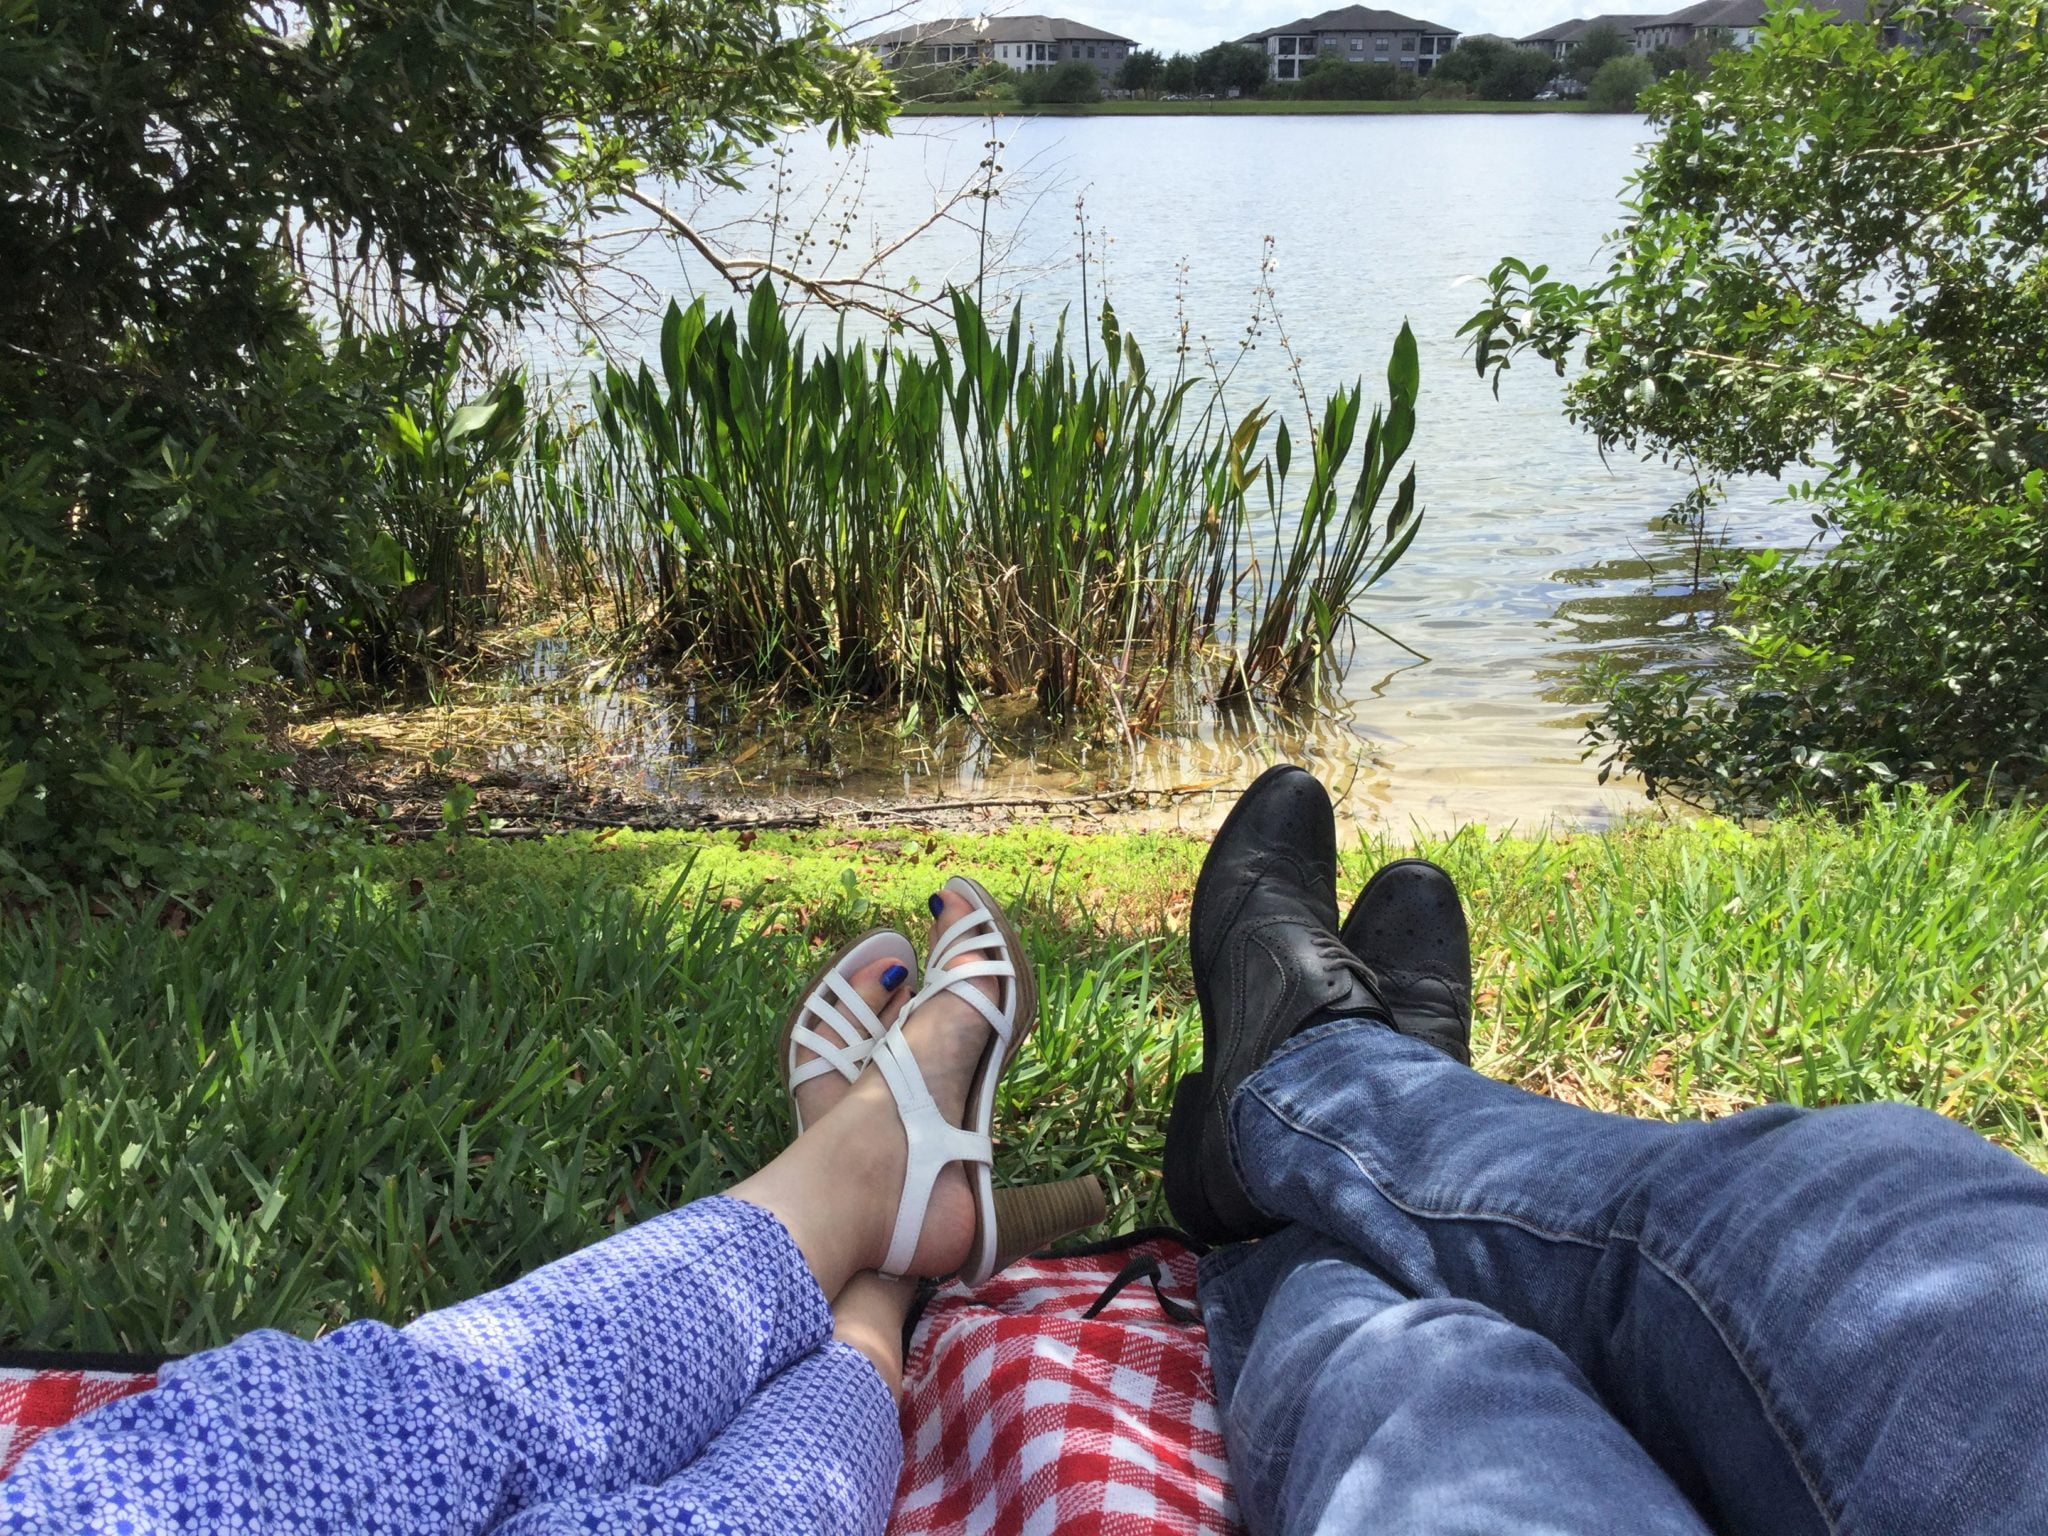 Everything You Need to Know to Plan a Romantic Orlando Picnic for Two